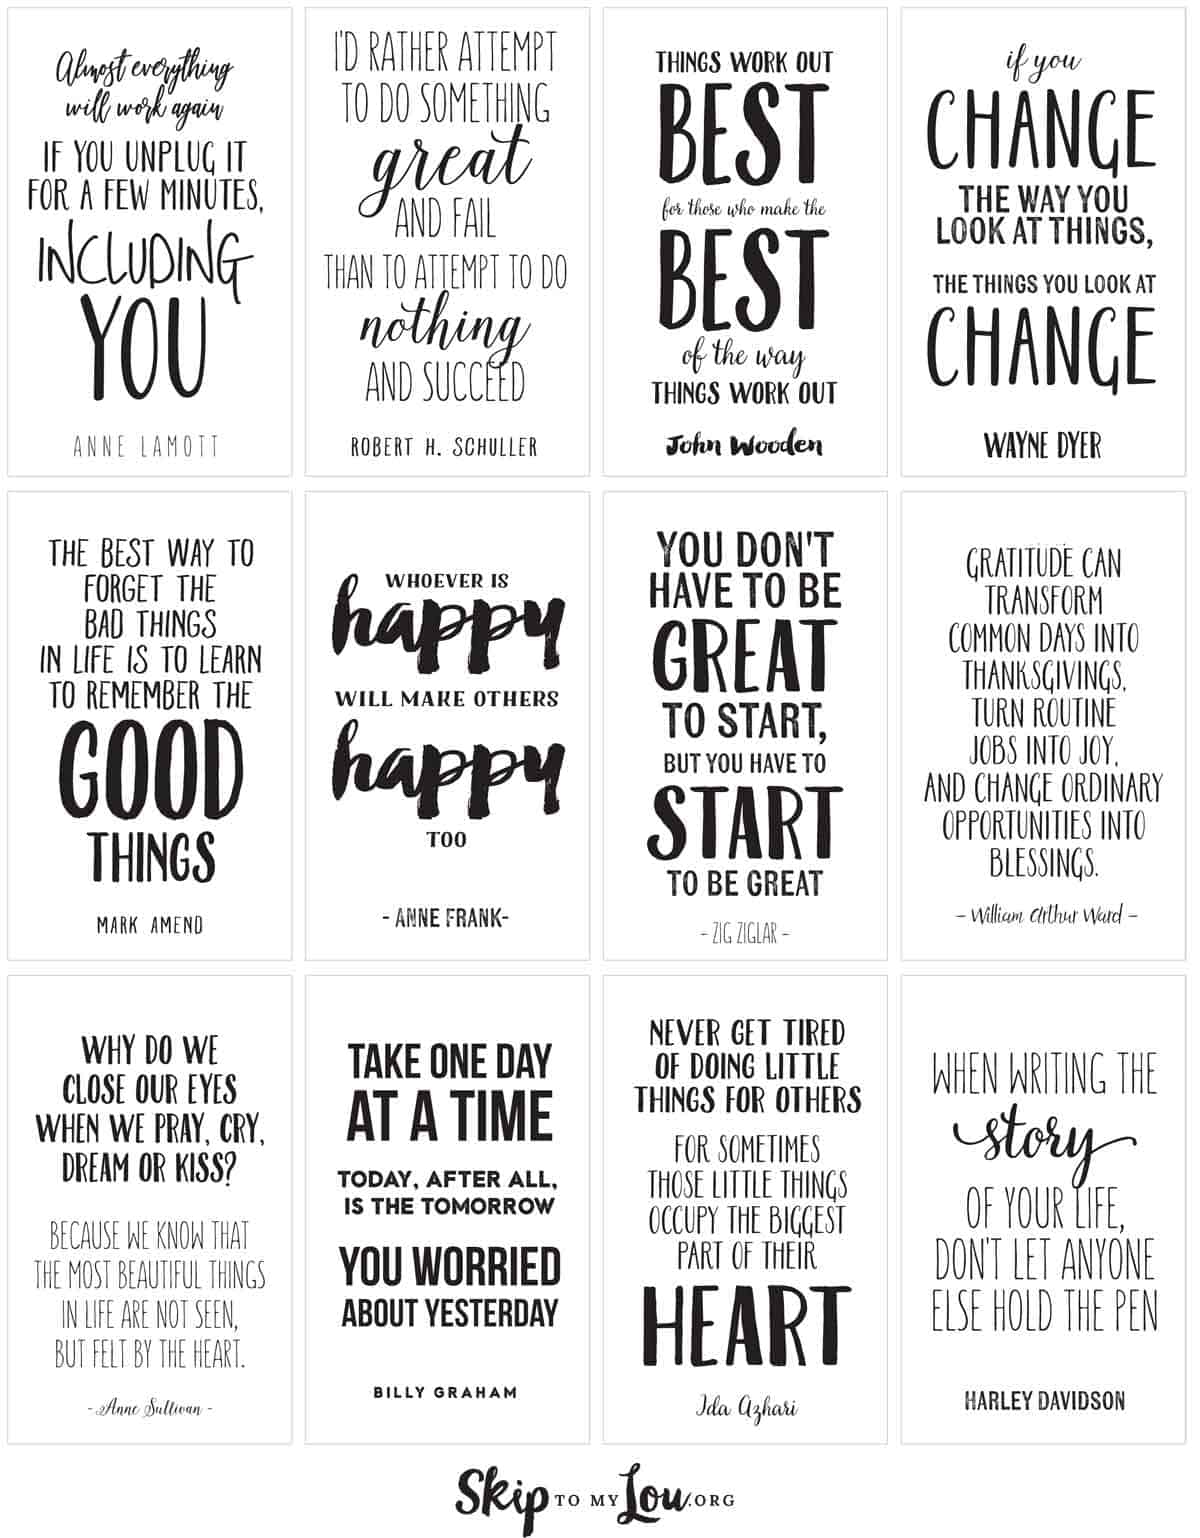 Amazing Life Quotes For Inspiration! {FREE PRINTABLE CARDS} | Skip To My Lou1200 x 1538